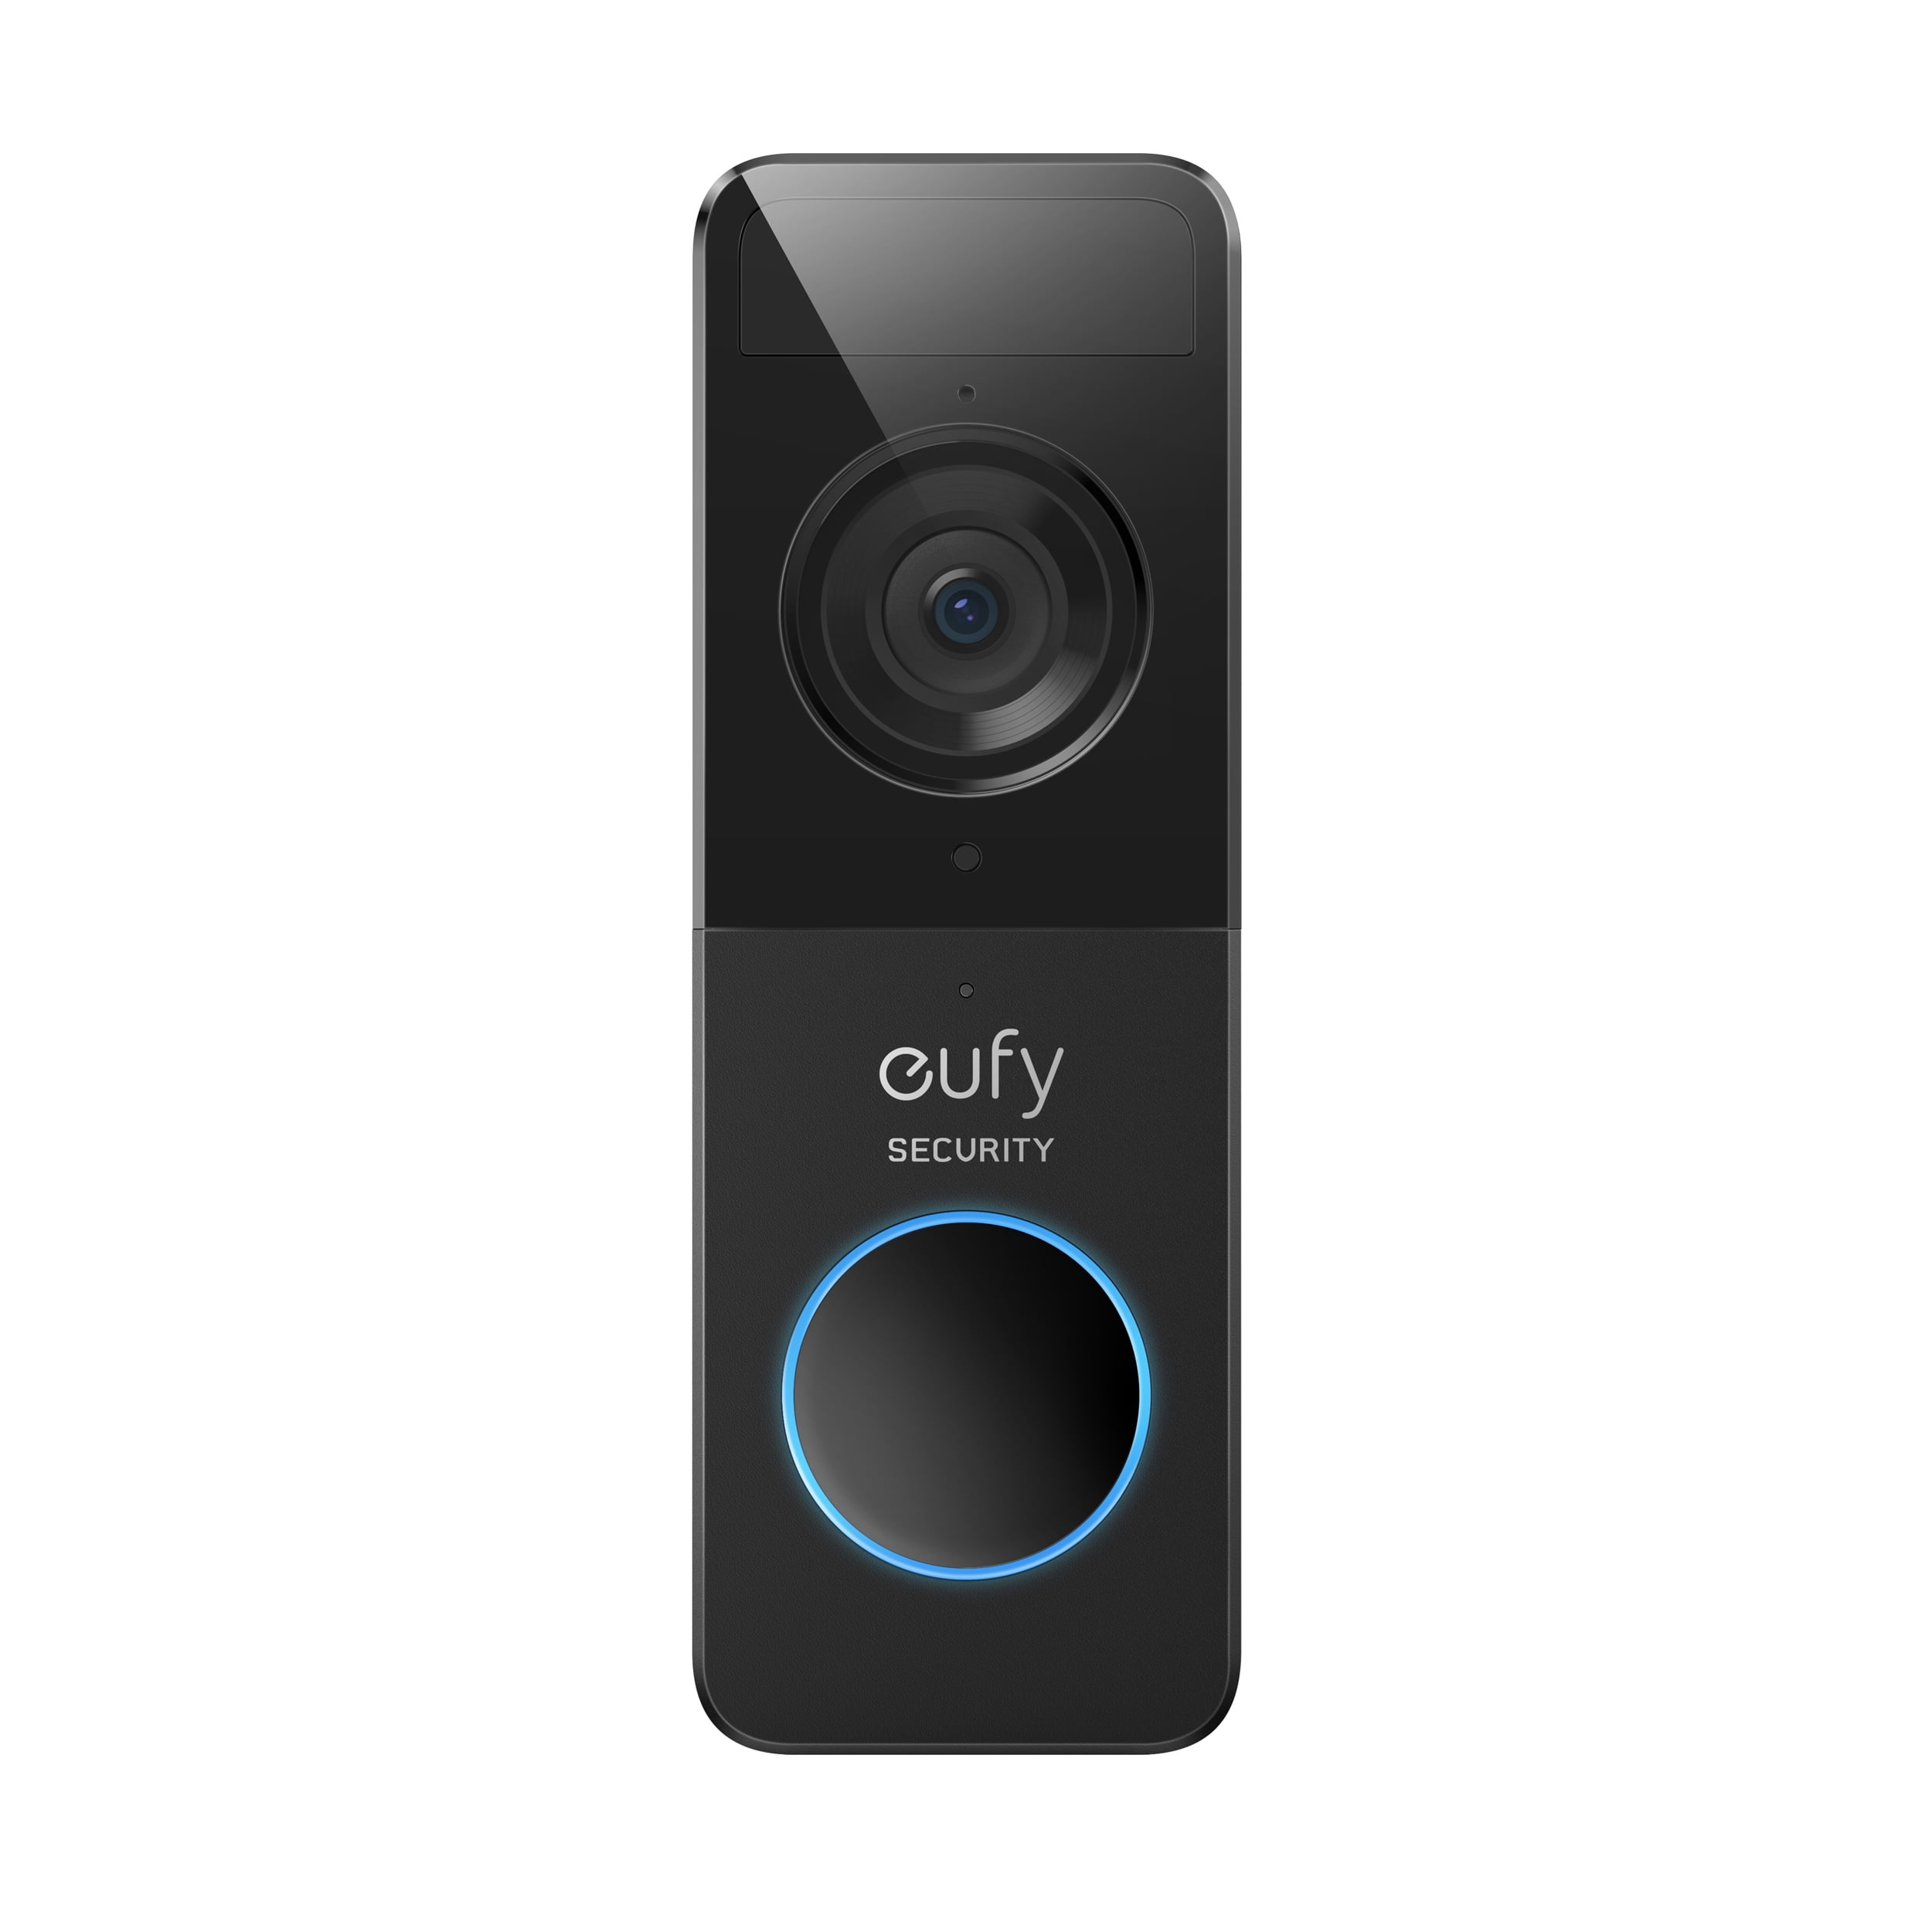 Anker's Eufy security cameras hit with new privacy brouhaha